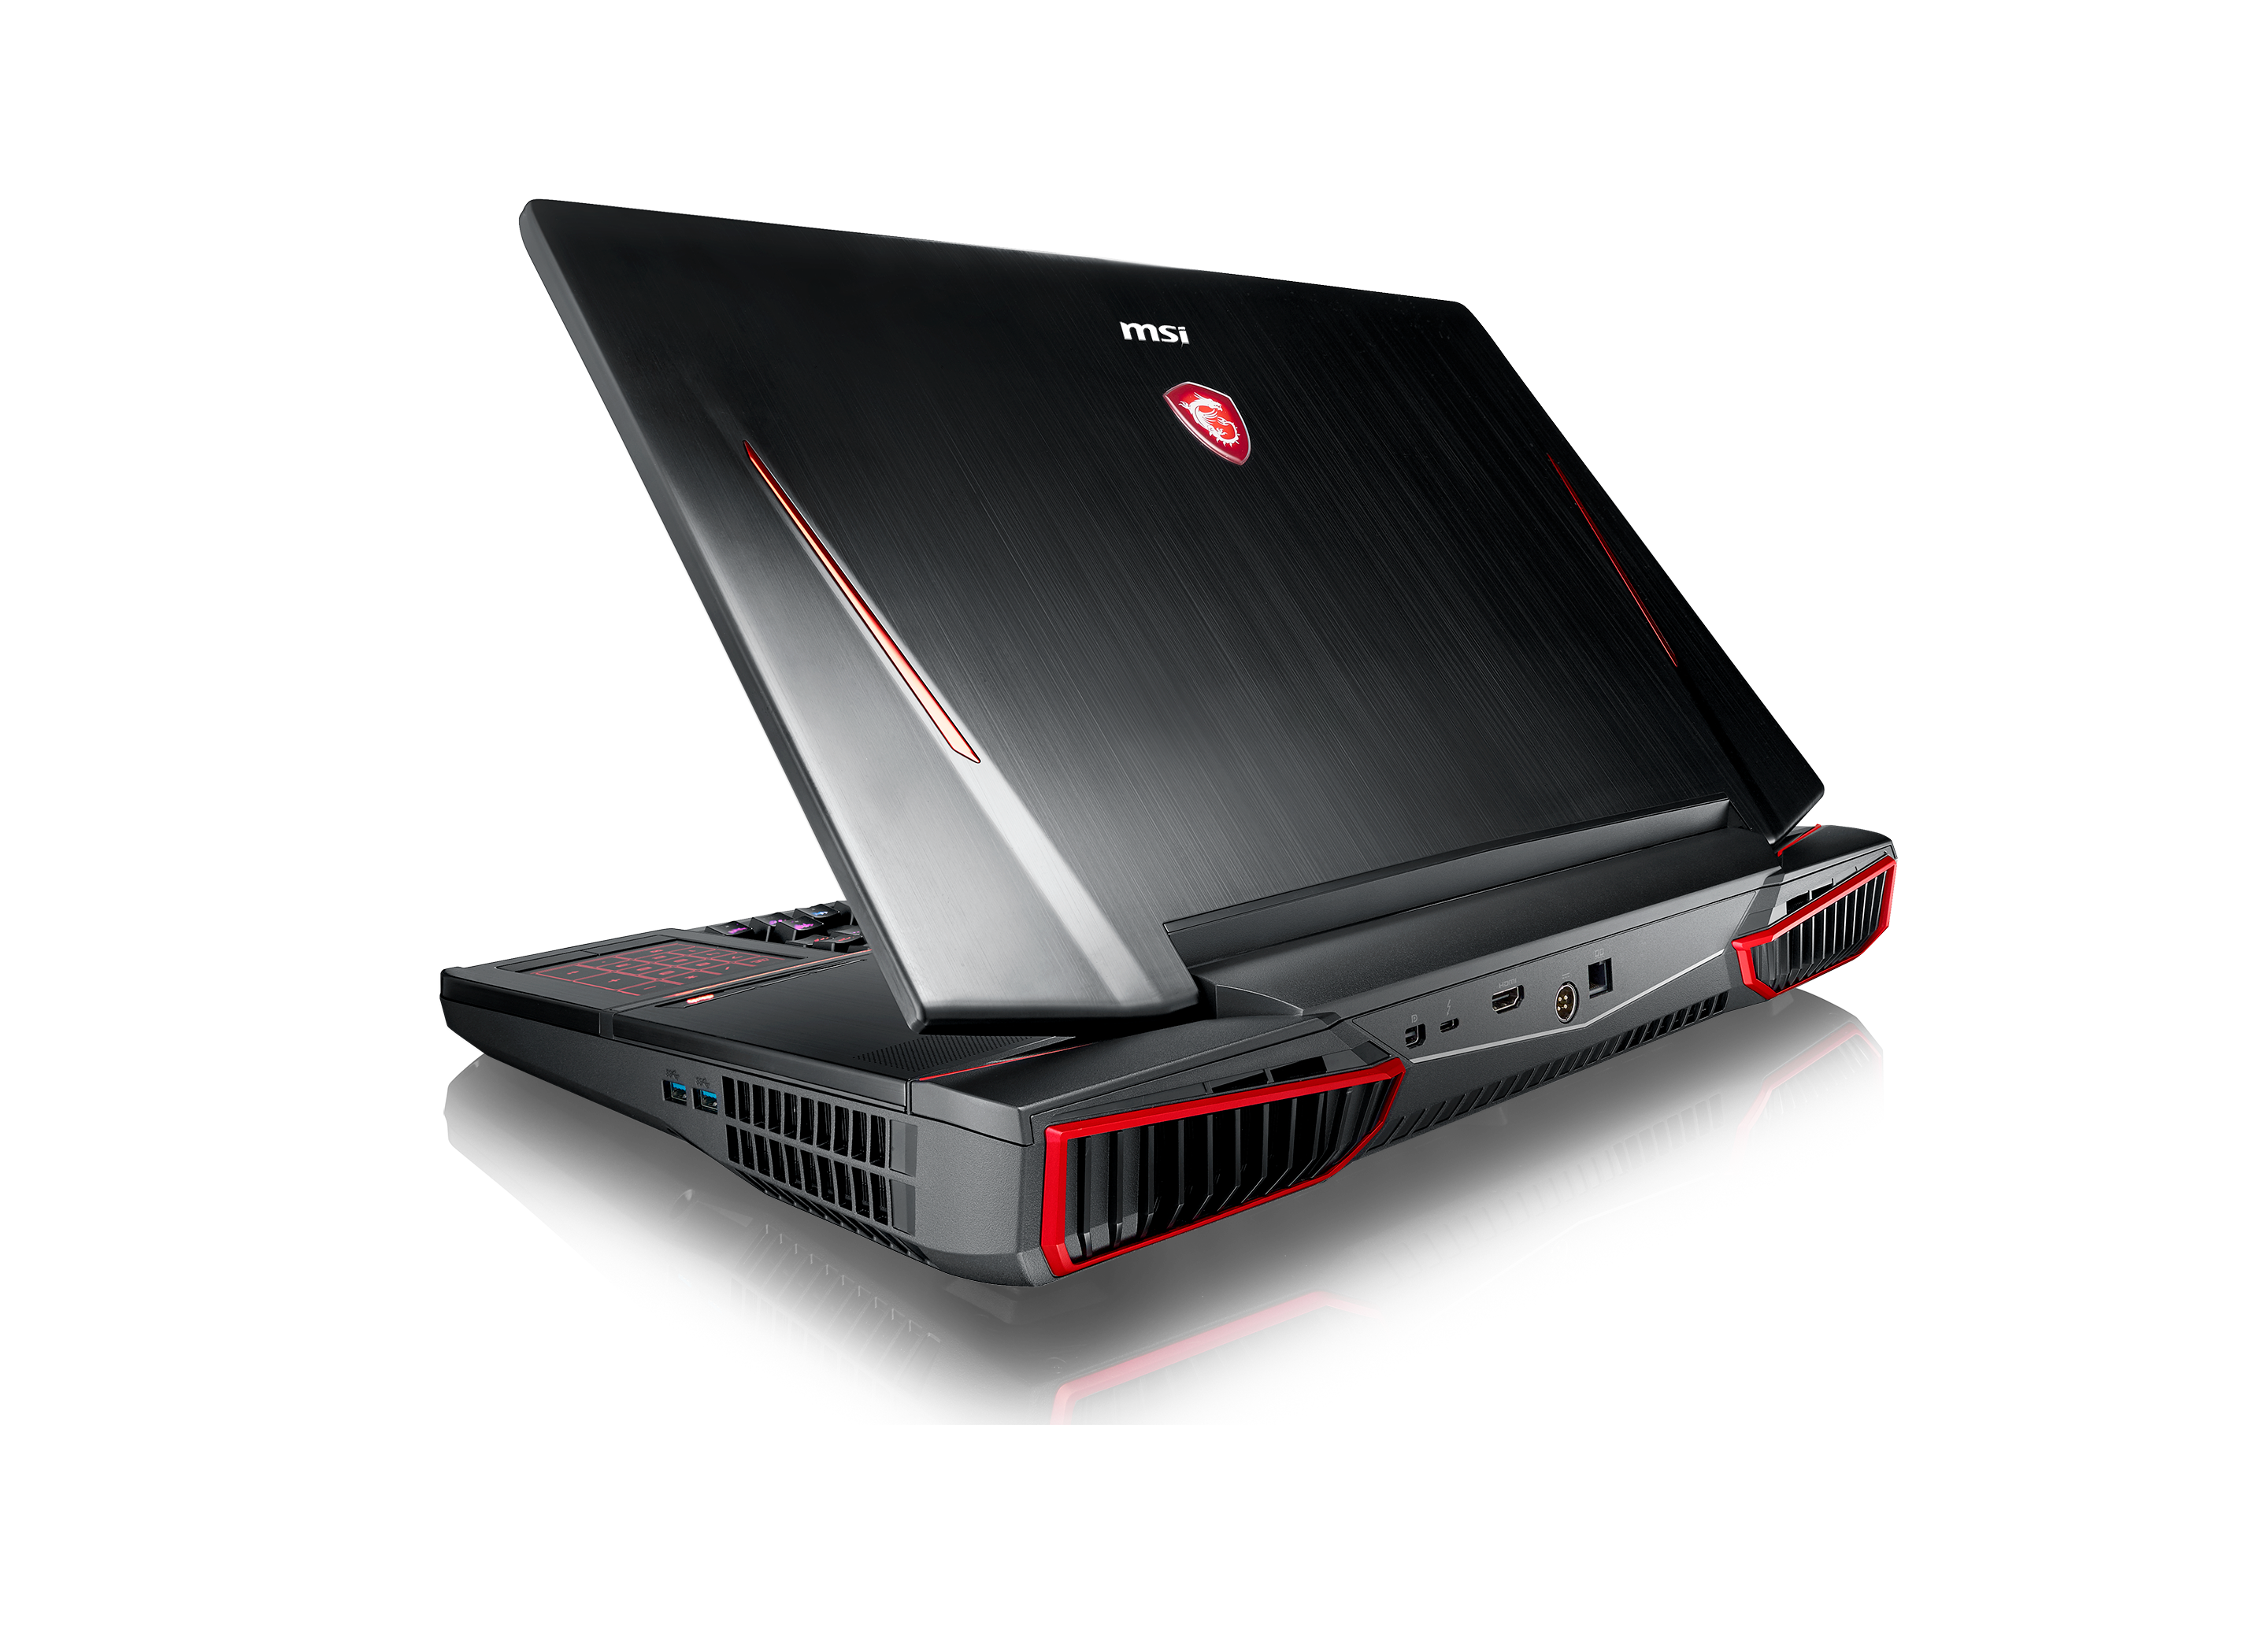 The MSI GT83VR with Windows 10